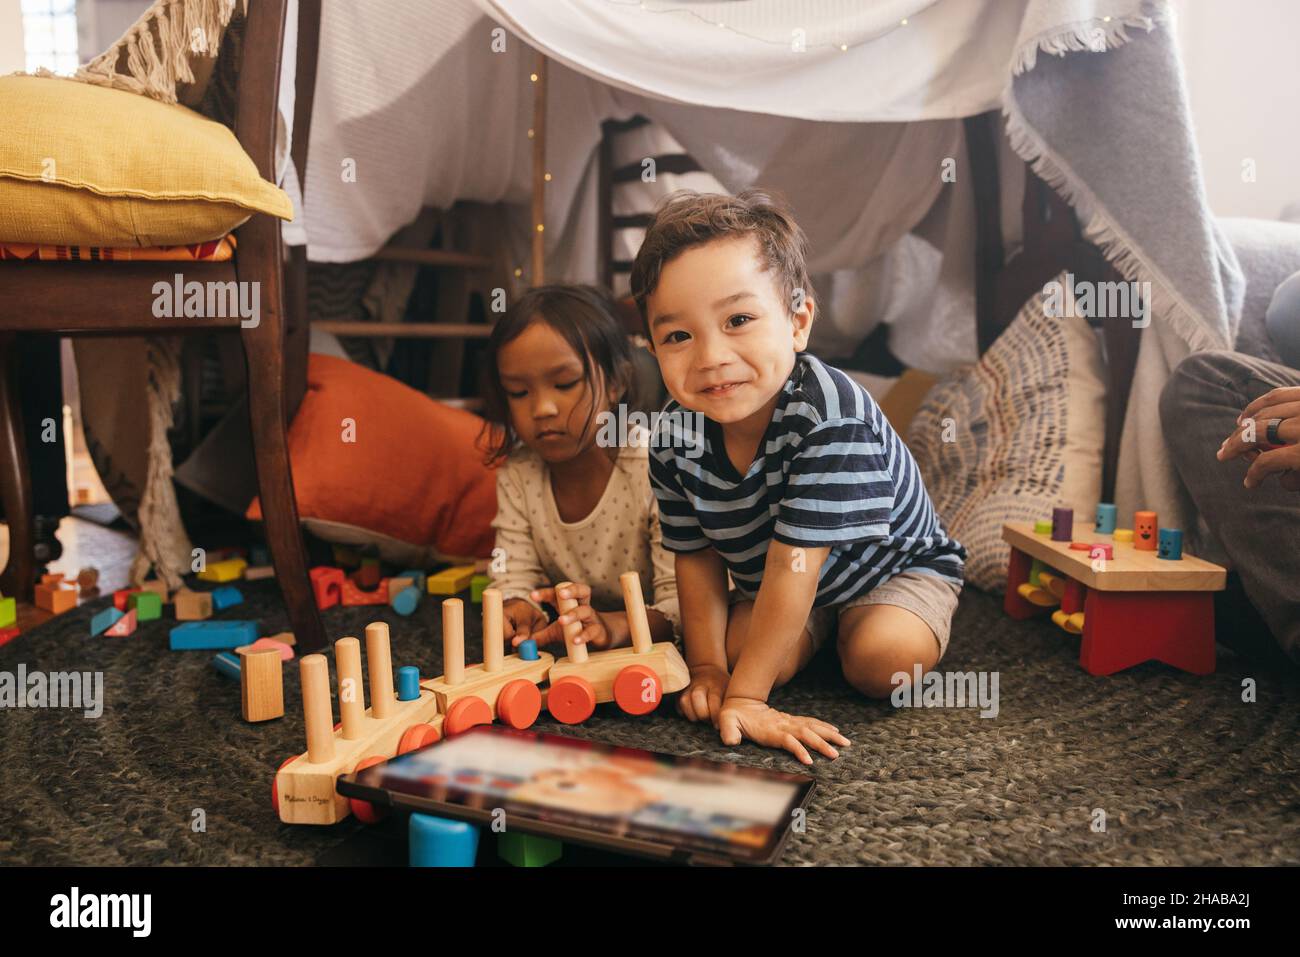 Cheerful little boy playing with his sister at home. Two adorable toddlers having fun in their play area with their parents sitting close by. Stock Photo